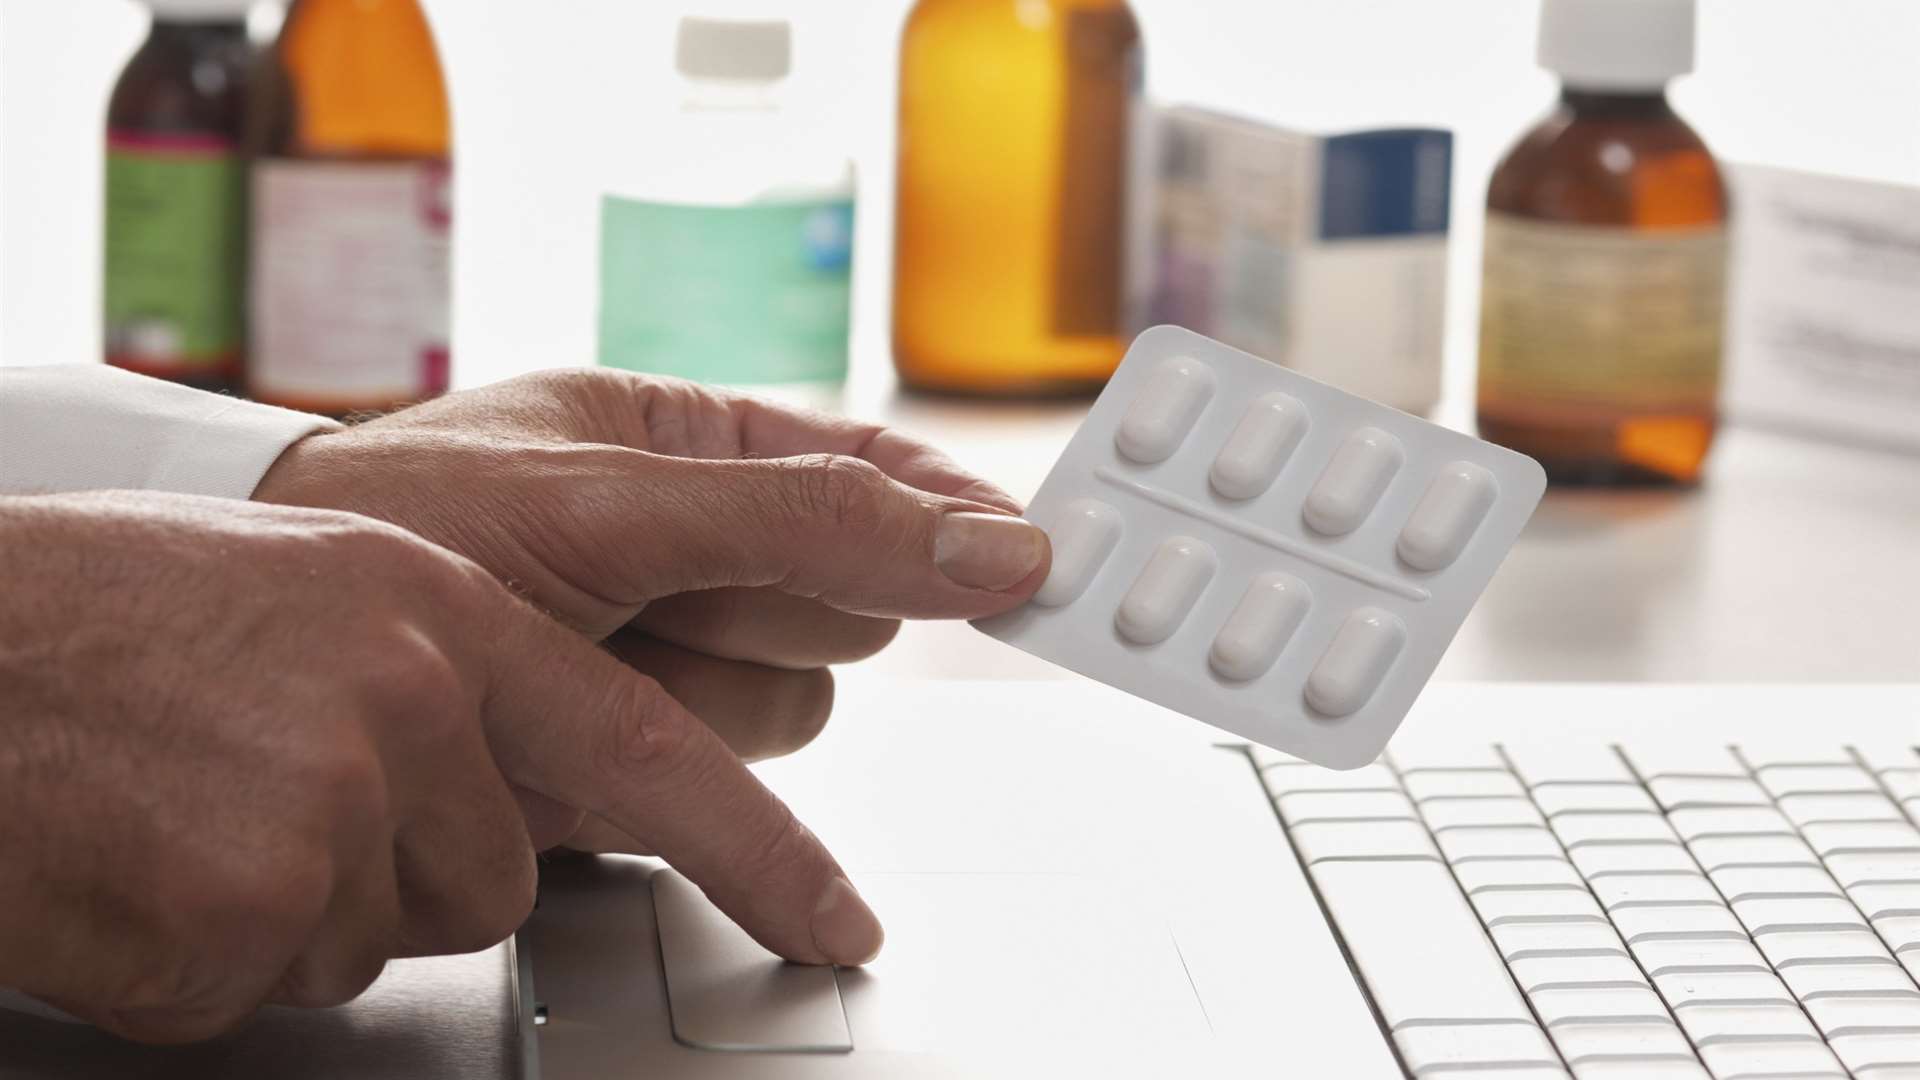 People are being warned of risks associated with overusing antibiotics